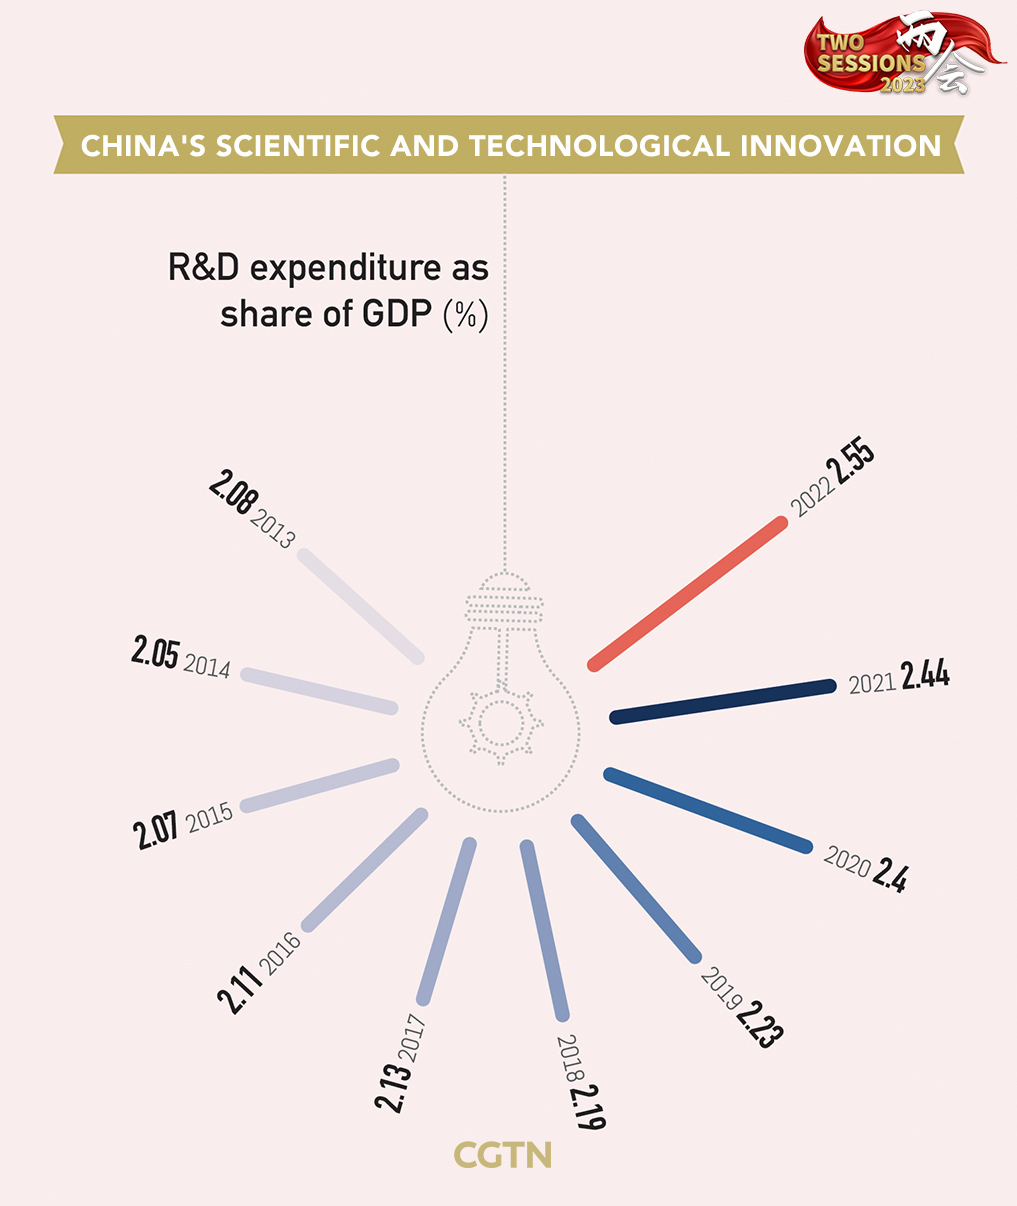 China's 2023 Two Sessions: Spending on basic research doubled over past 5 years